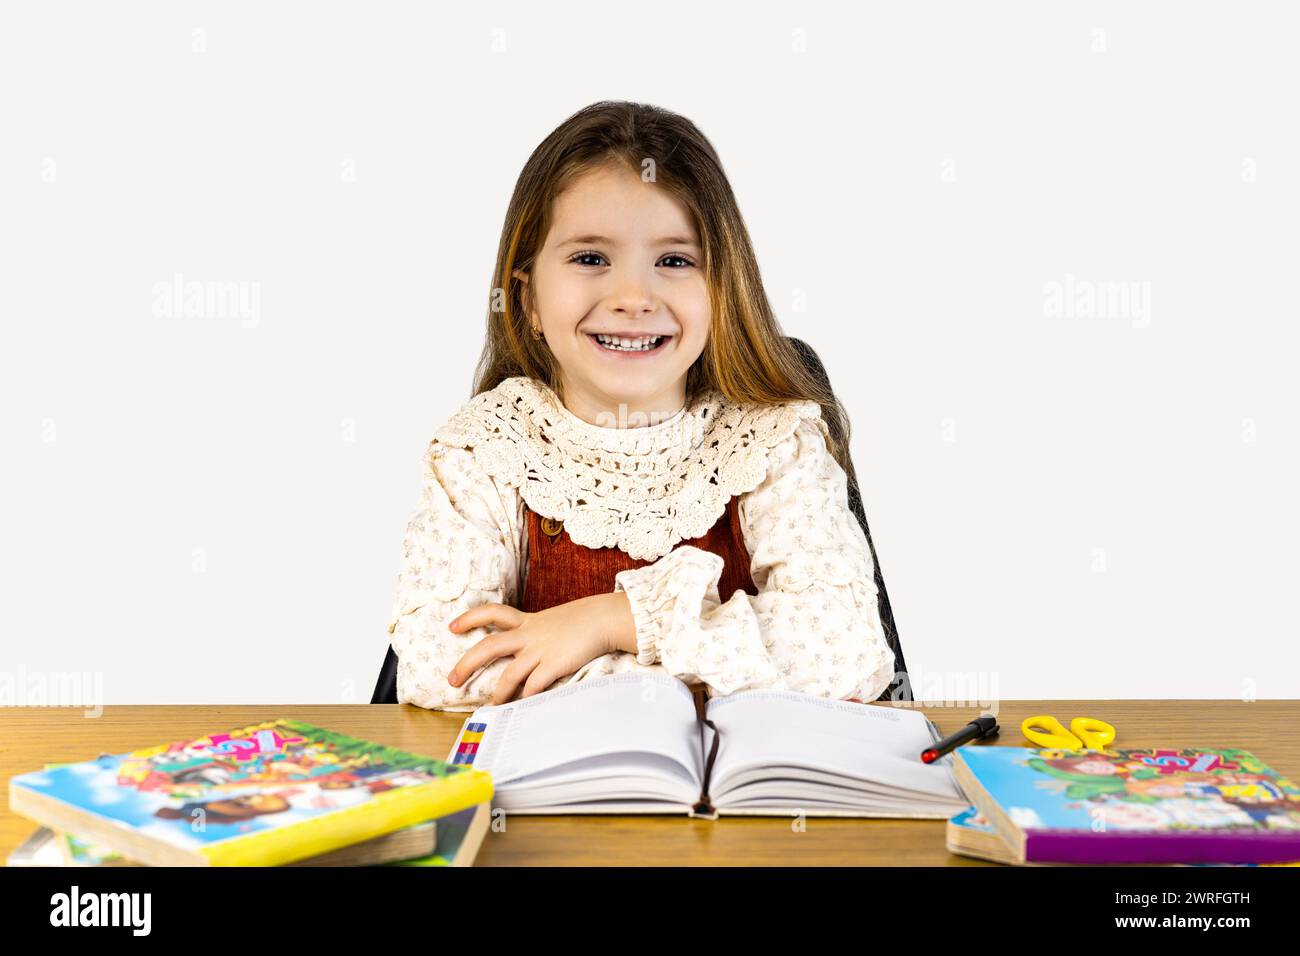 A happy toddler is sitting at a desk, sharing books and having fun. Her smile lights up the room as she leisurely flips through the pages Stock Photo